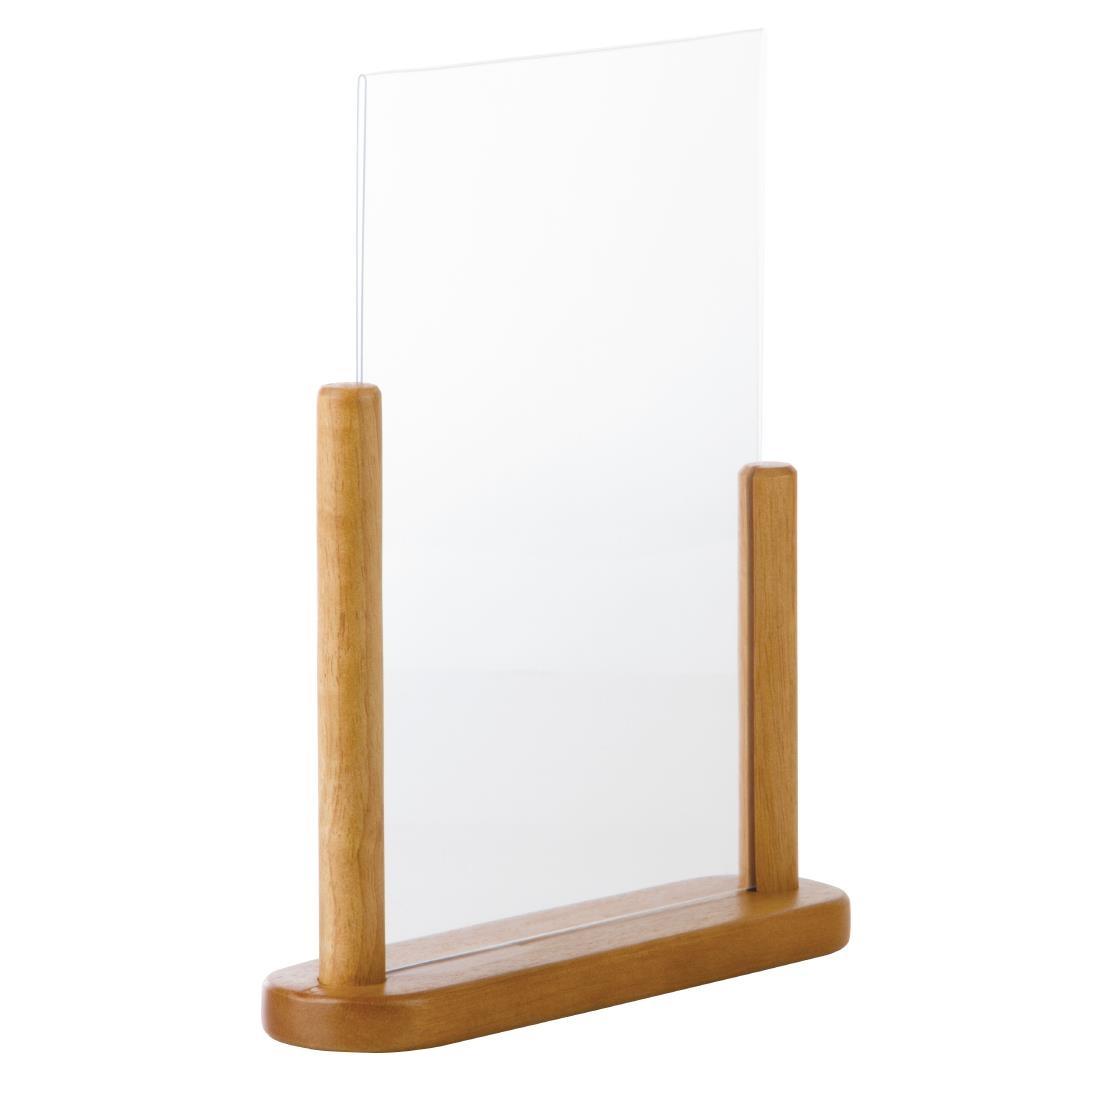 Securit Acrylic Menu Holder With Wooden Frame A4 - CE409  - 1